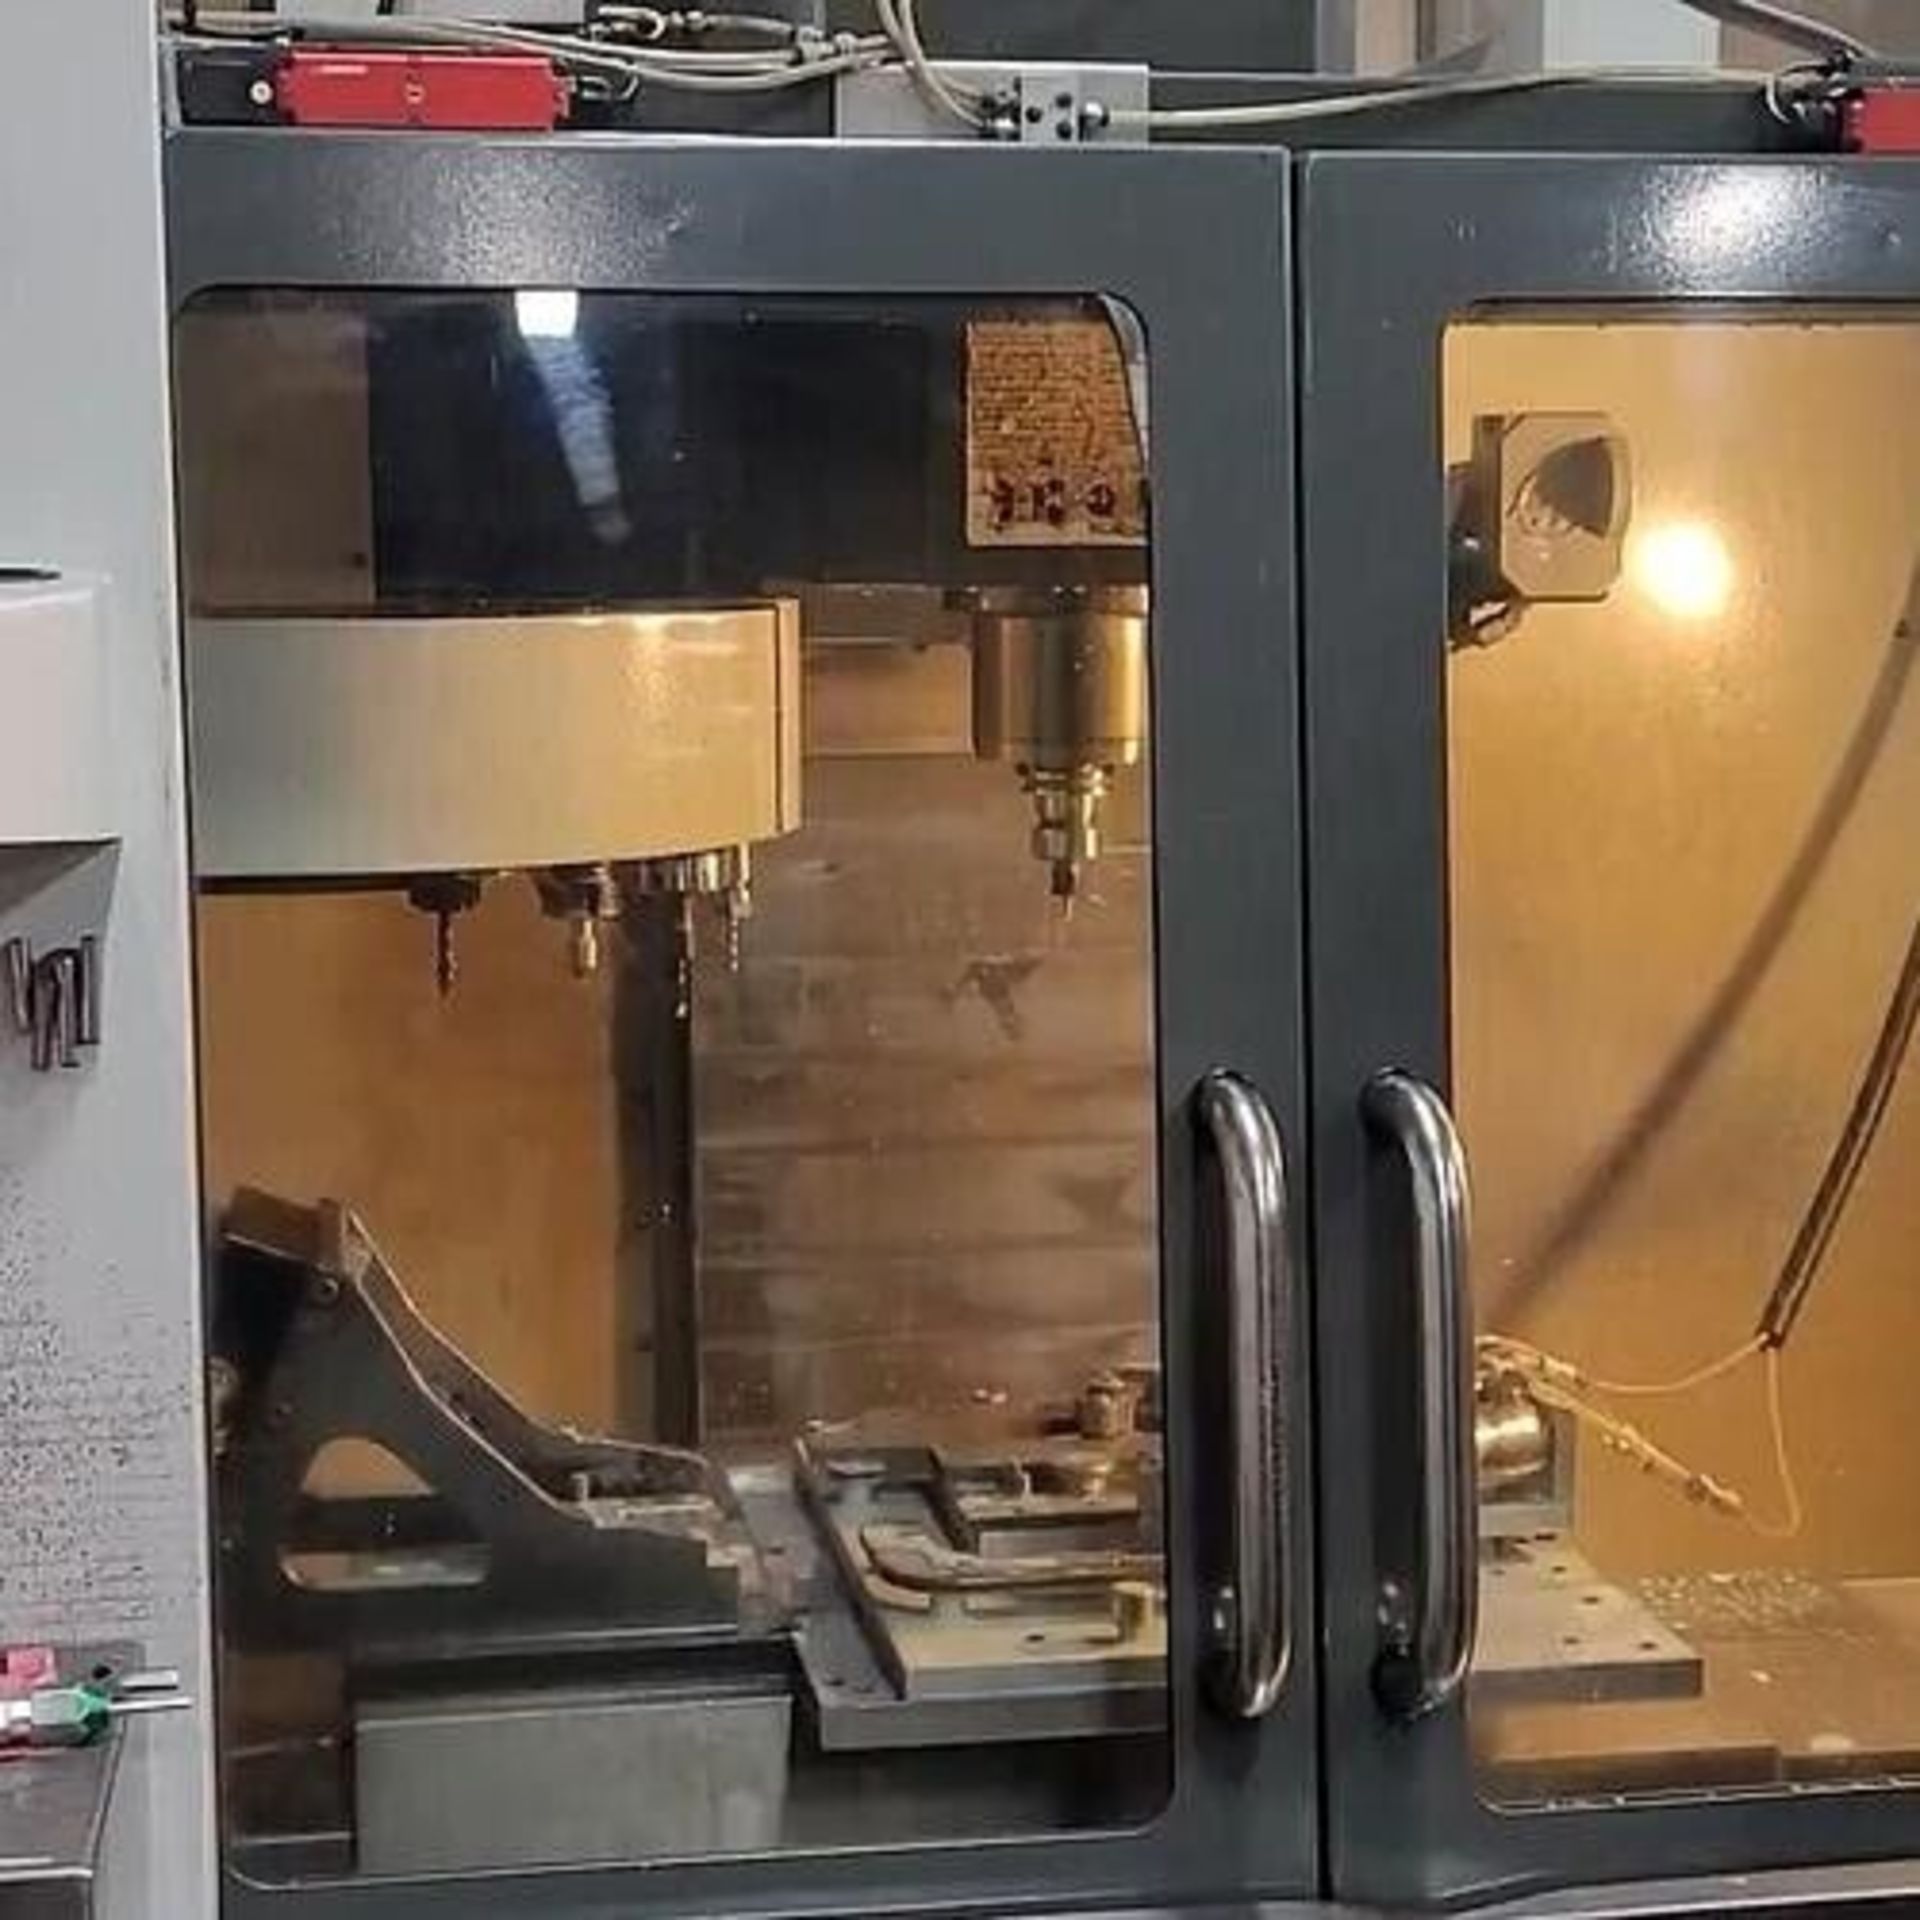 2012 HAAS VF-1 CNC Vertical Machining Center - Image 3 of 10